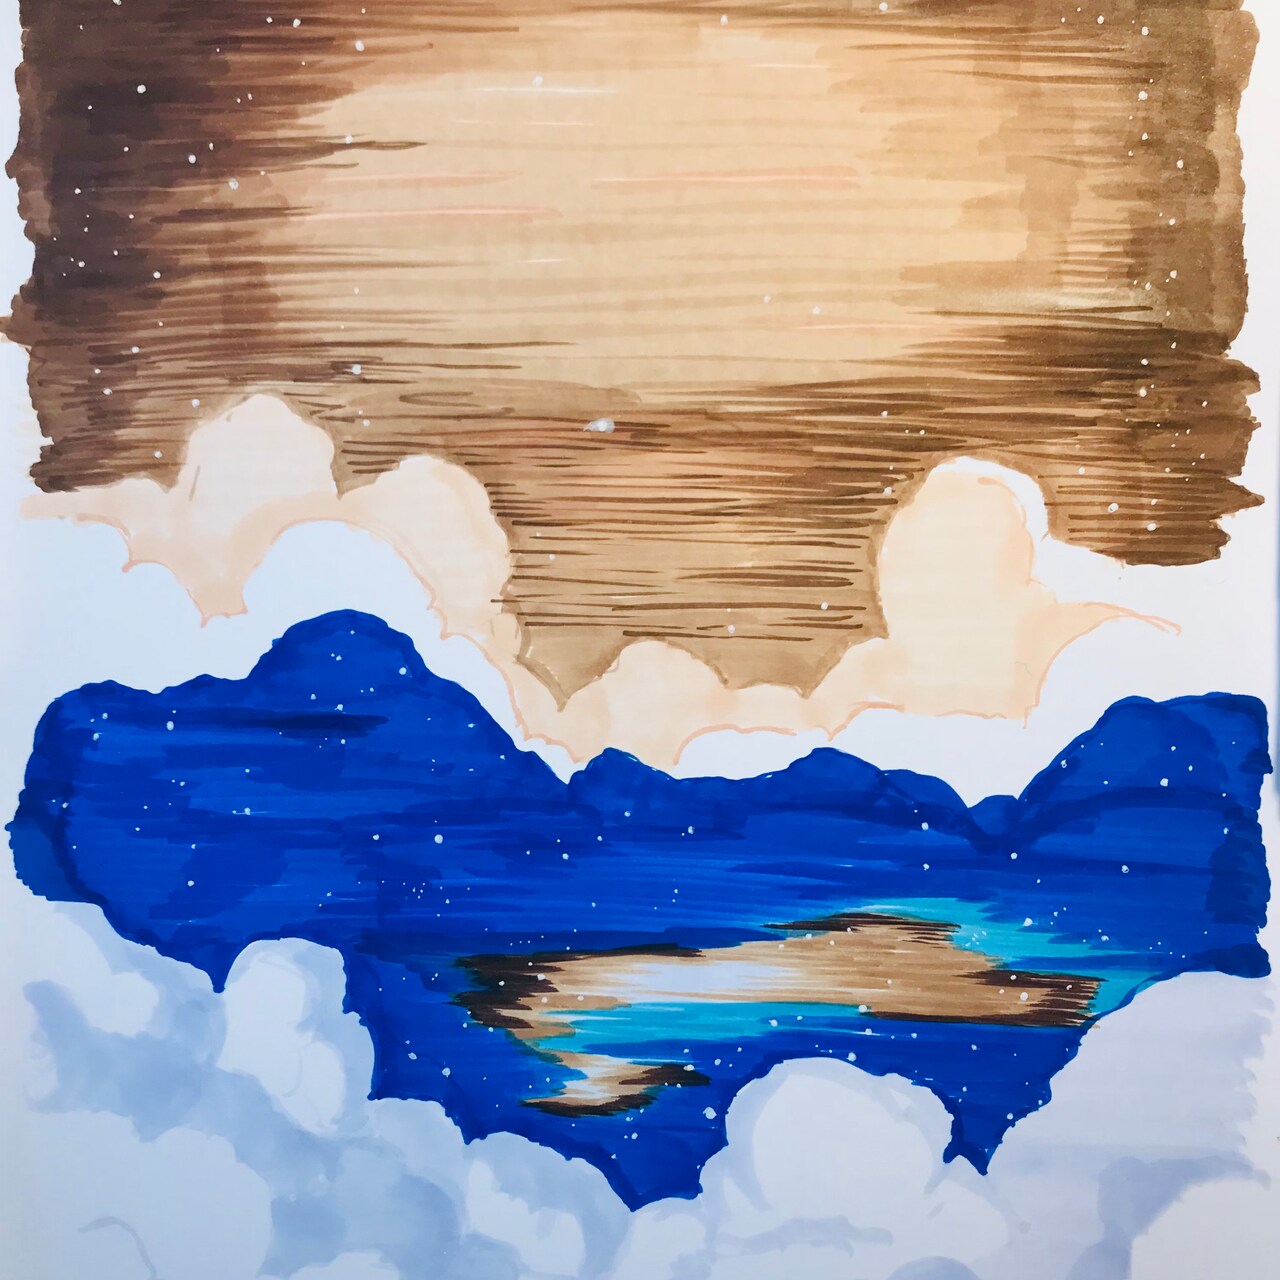 Alcohol-Based Markers Ethereal Cloudscape with @AdrienneHodgeArt, Part I